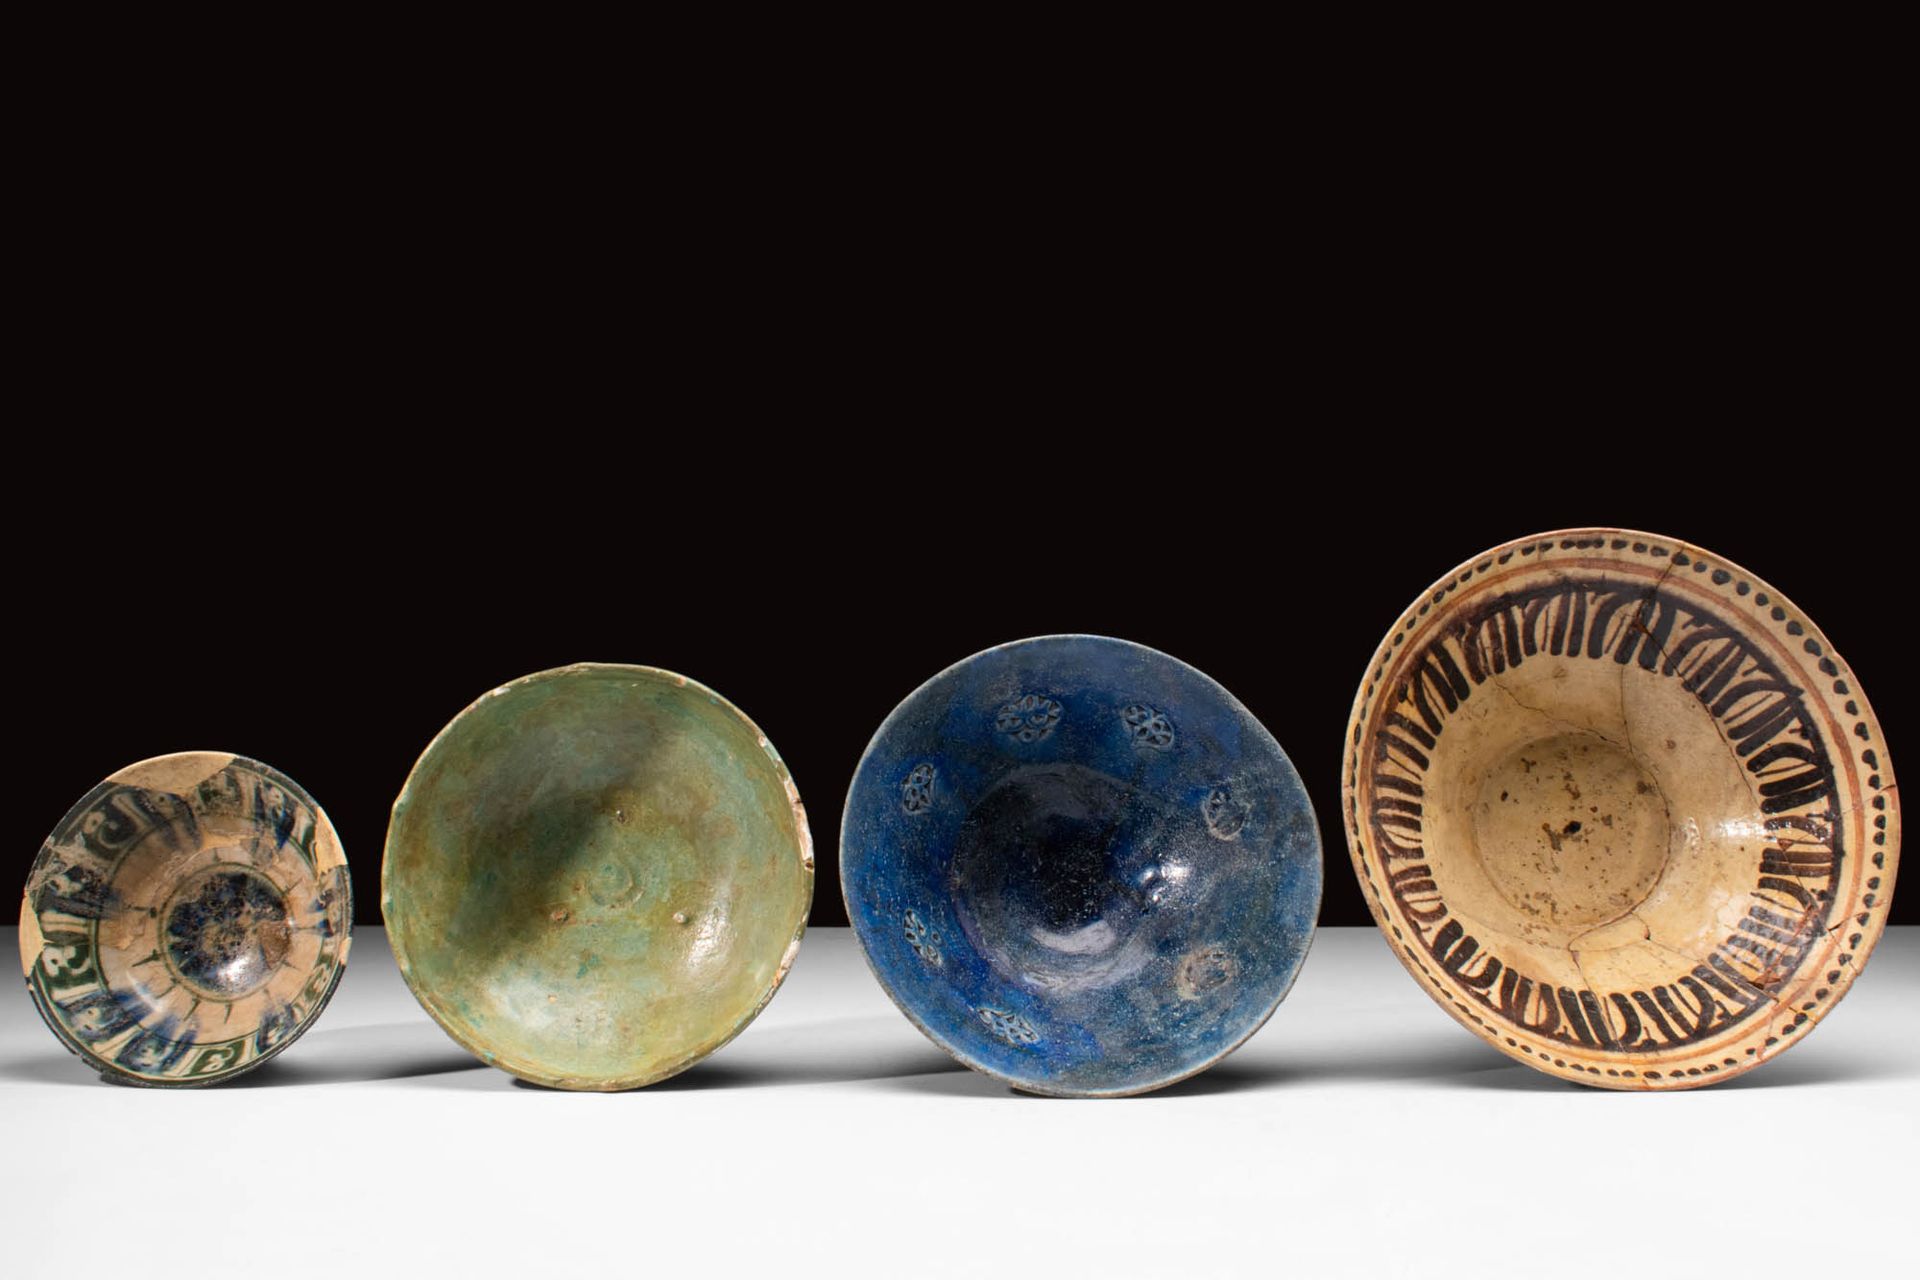 FOUR MEDIEVAL SELJUK GLAZED VESSELS Ca. AD 900 - 1300.
A collection of four Isla&hellip;